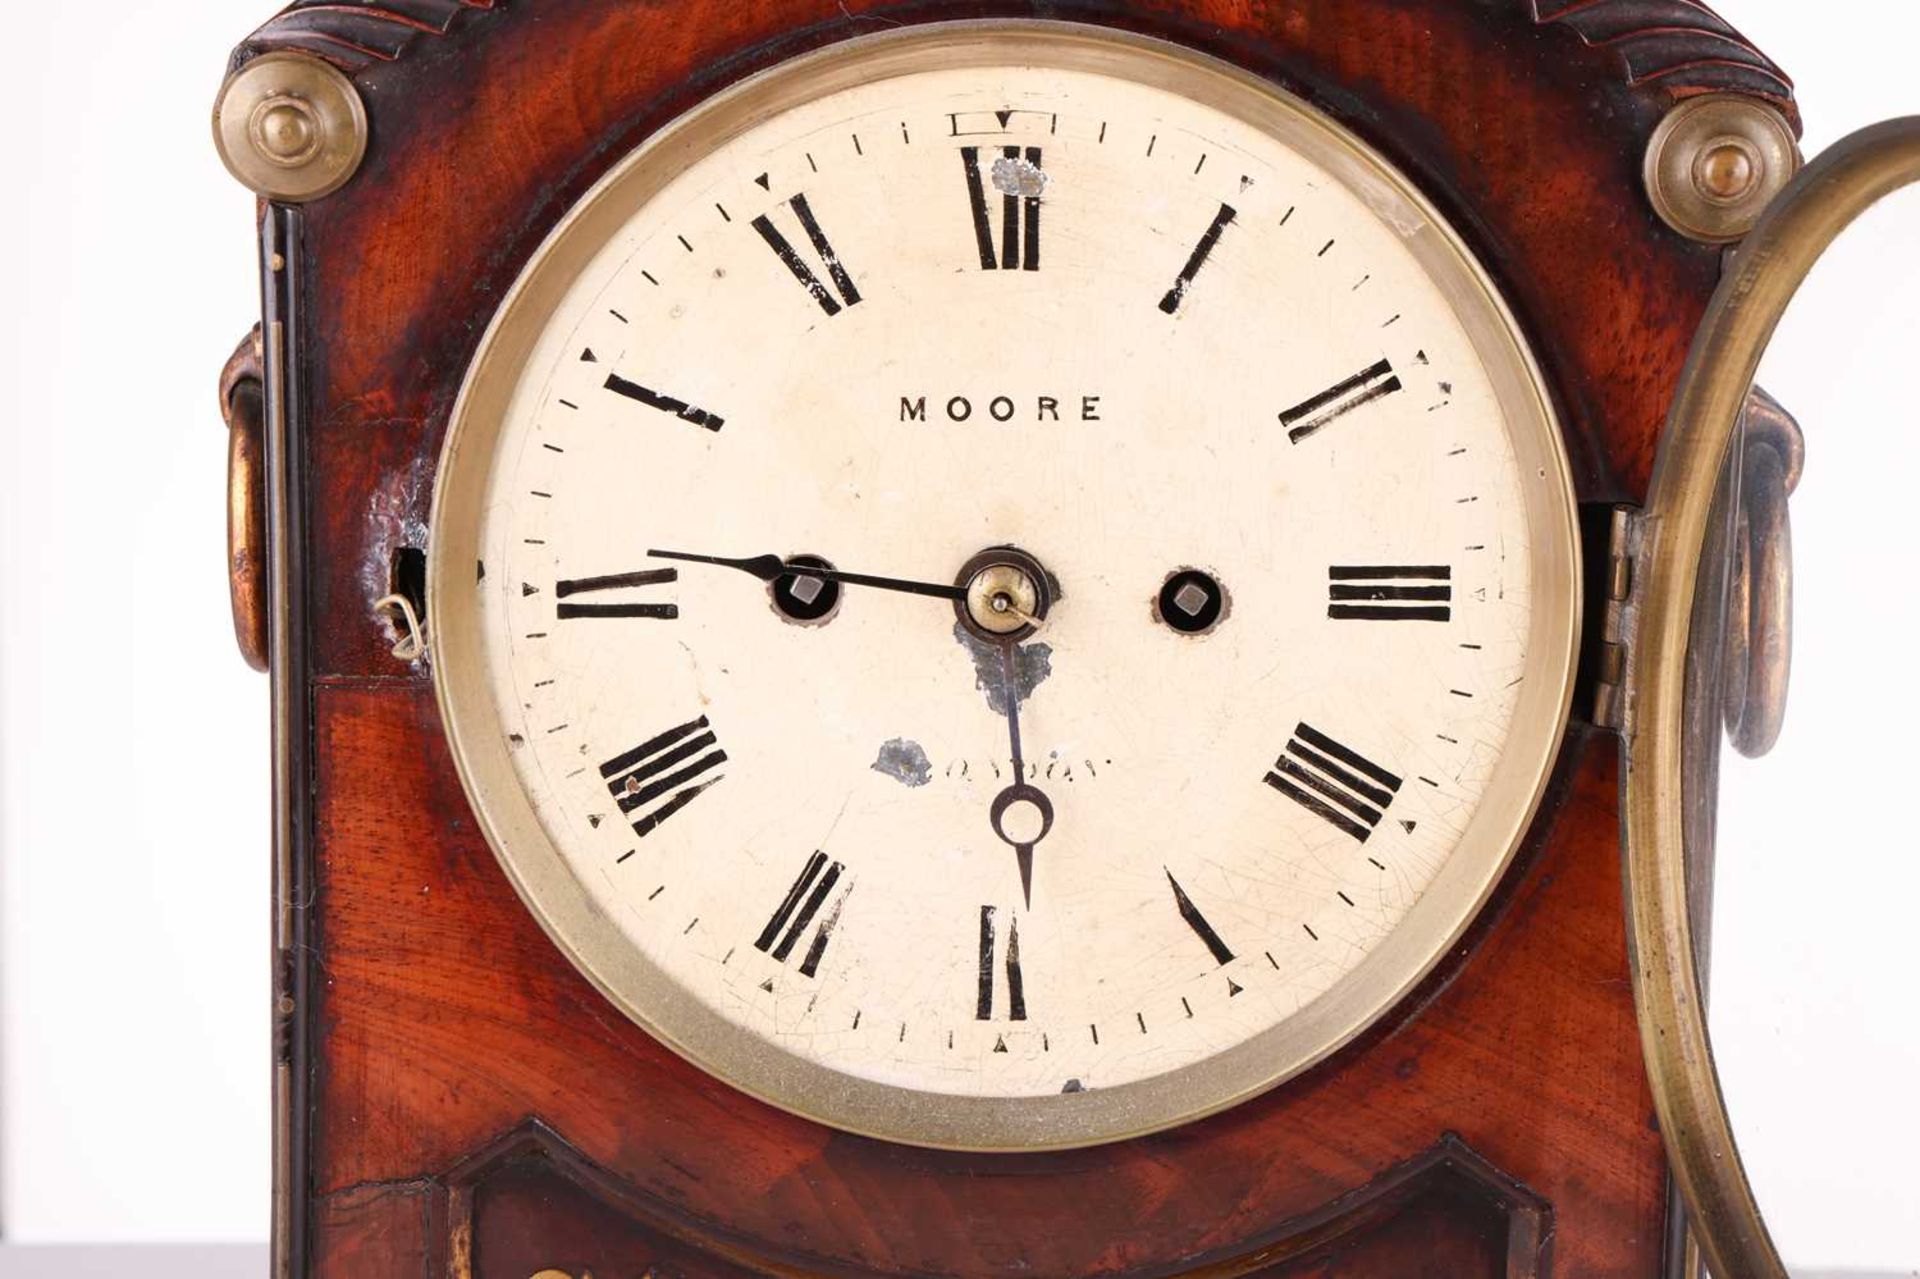 Moore of London a Regency mahogany 8-day twin fusee mantel clock case, with an arched top case and p - Image 6 of 7